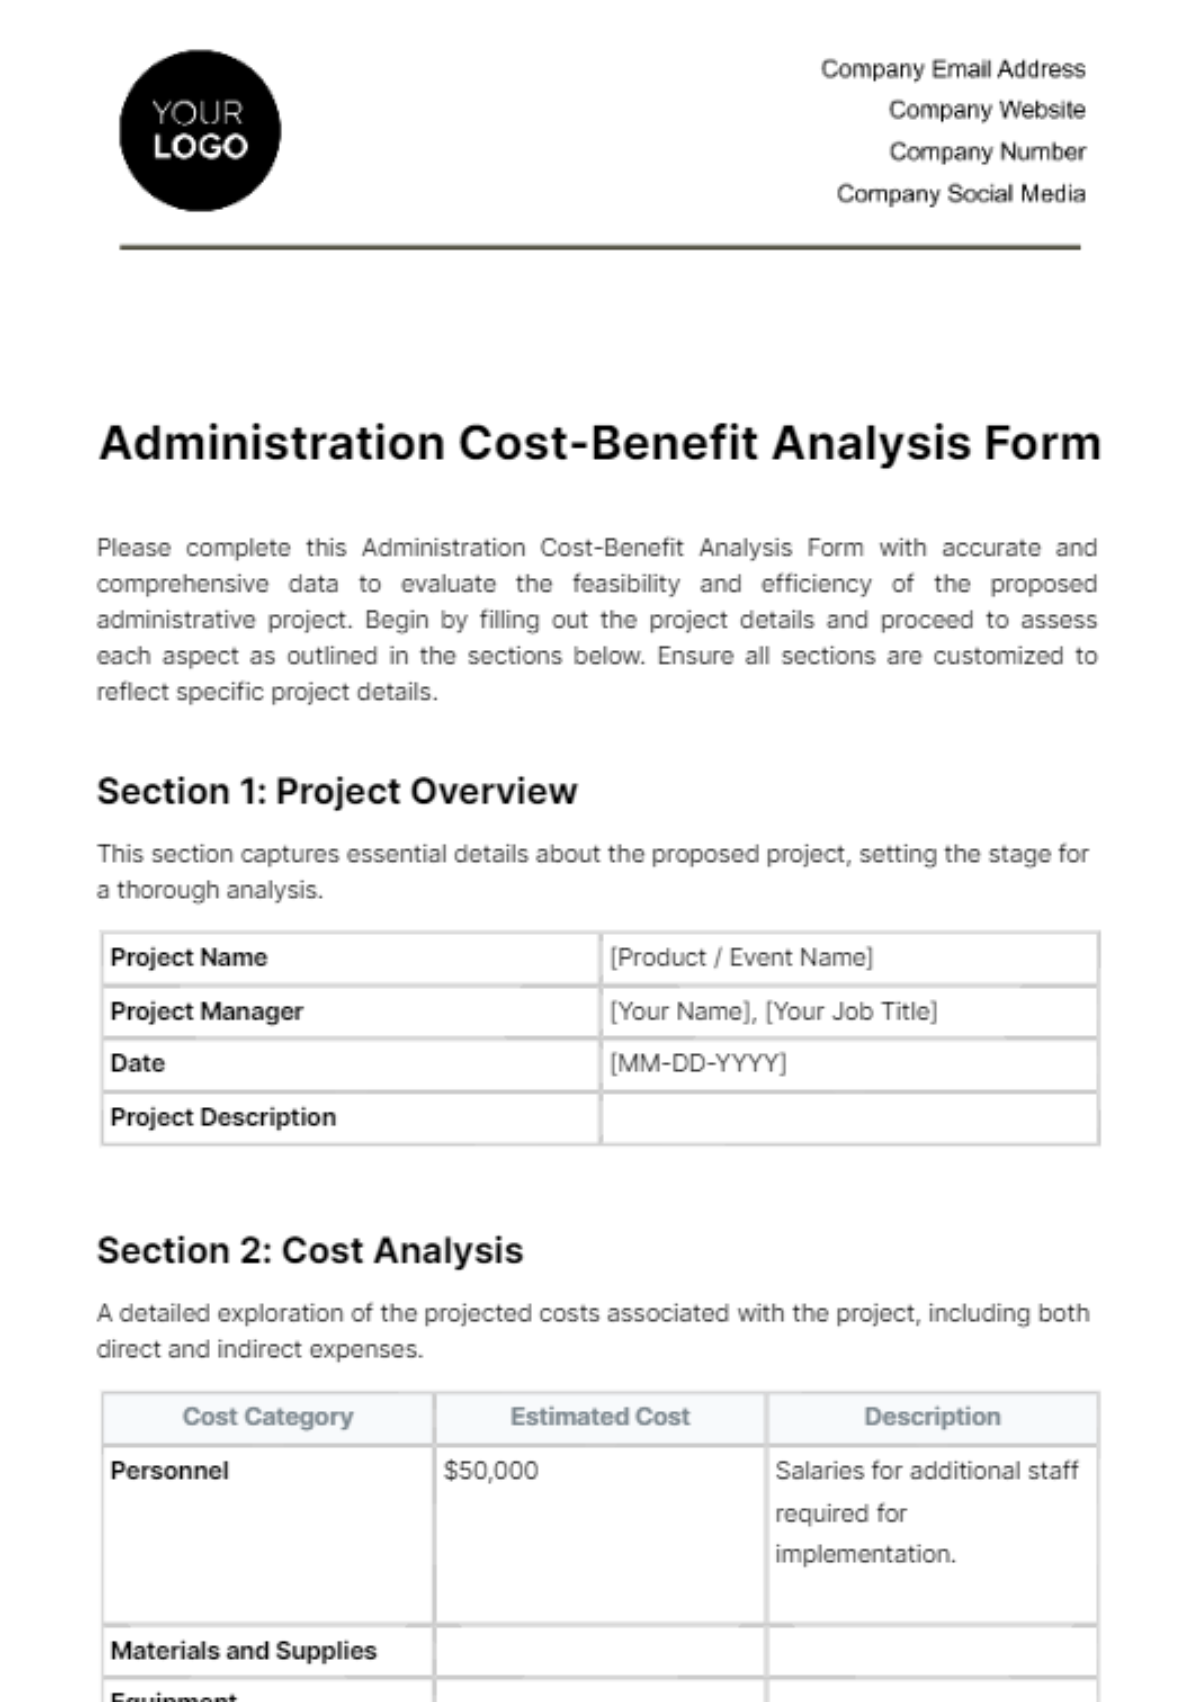 Administration Cost-Benefit Analysis Form Template